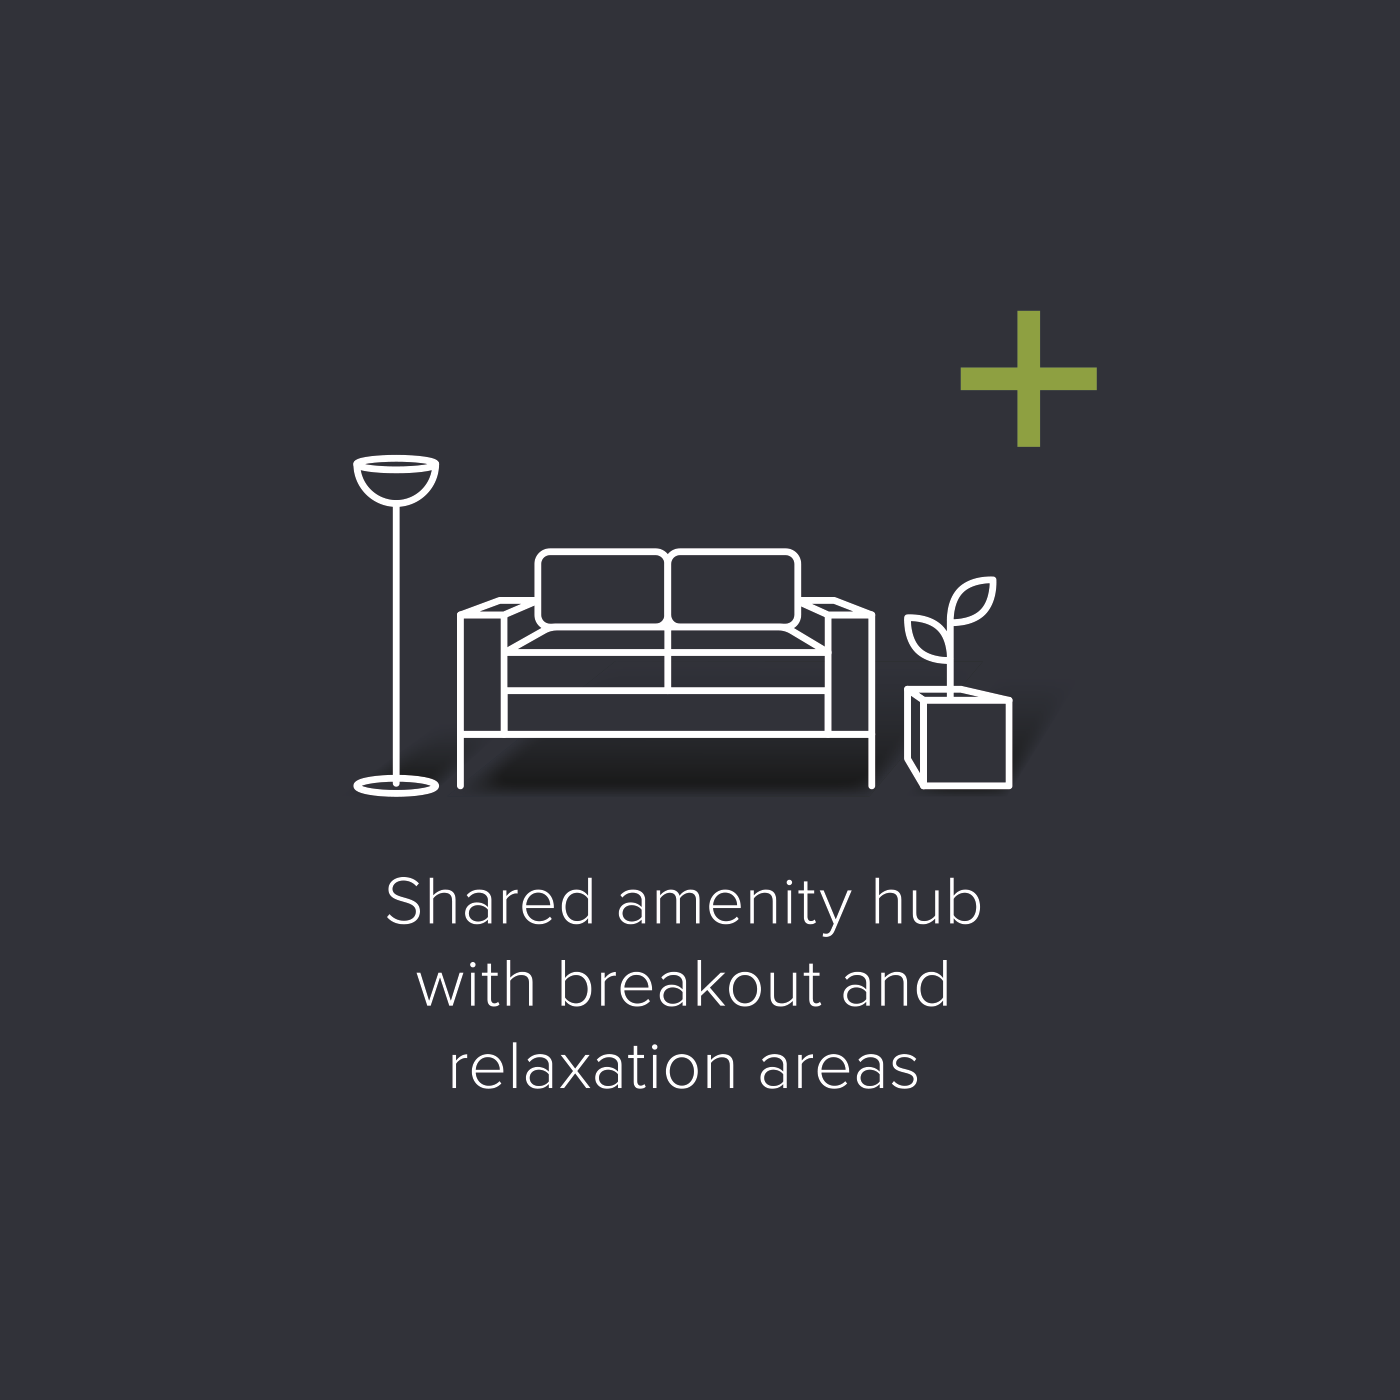 Shared amenity hub with breakout and relaxation areas